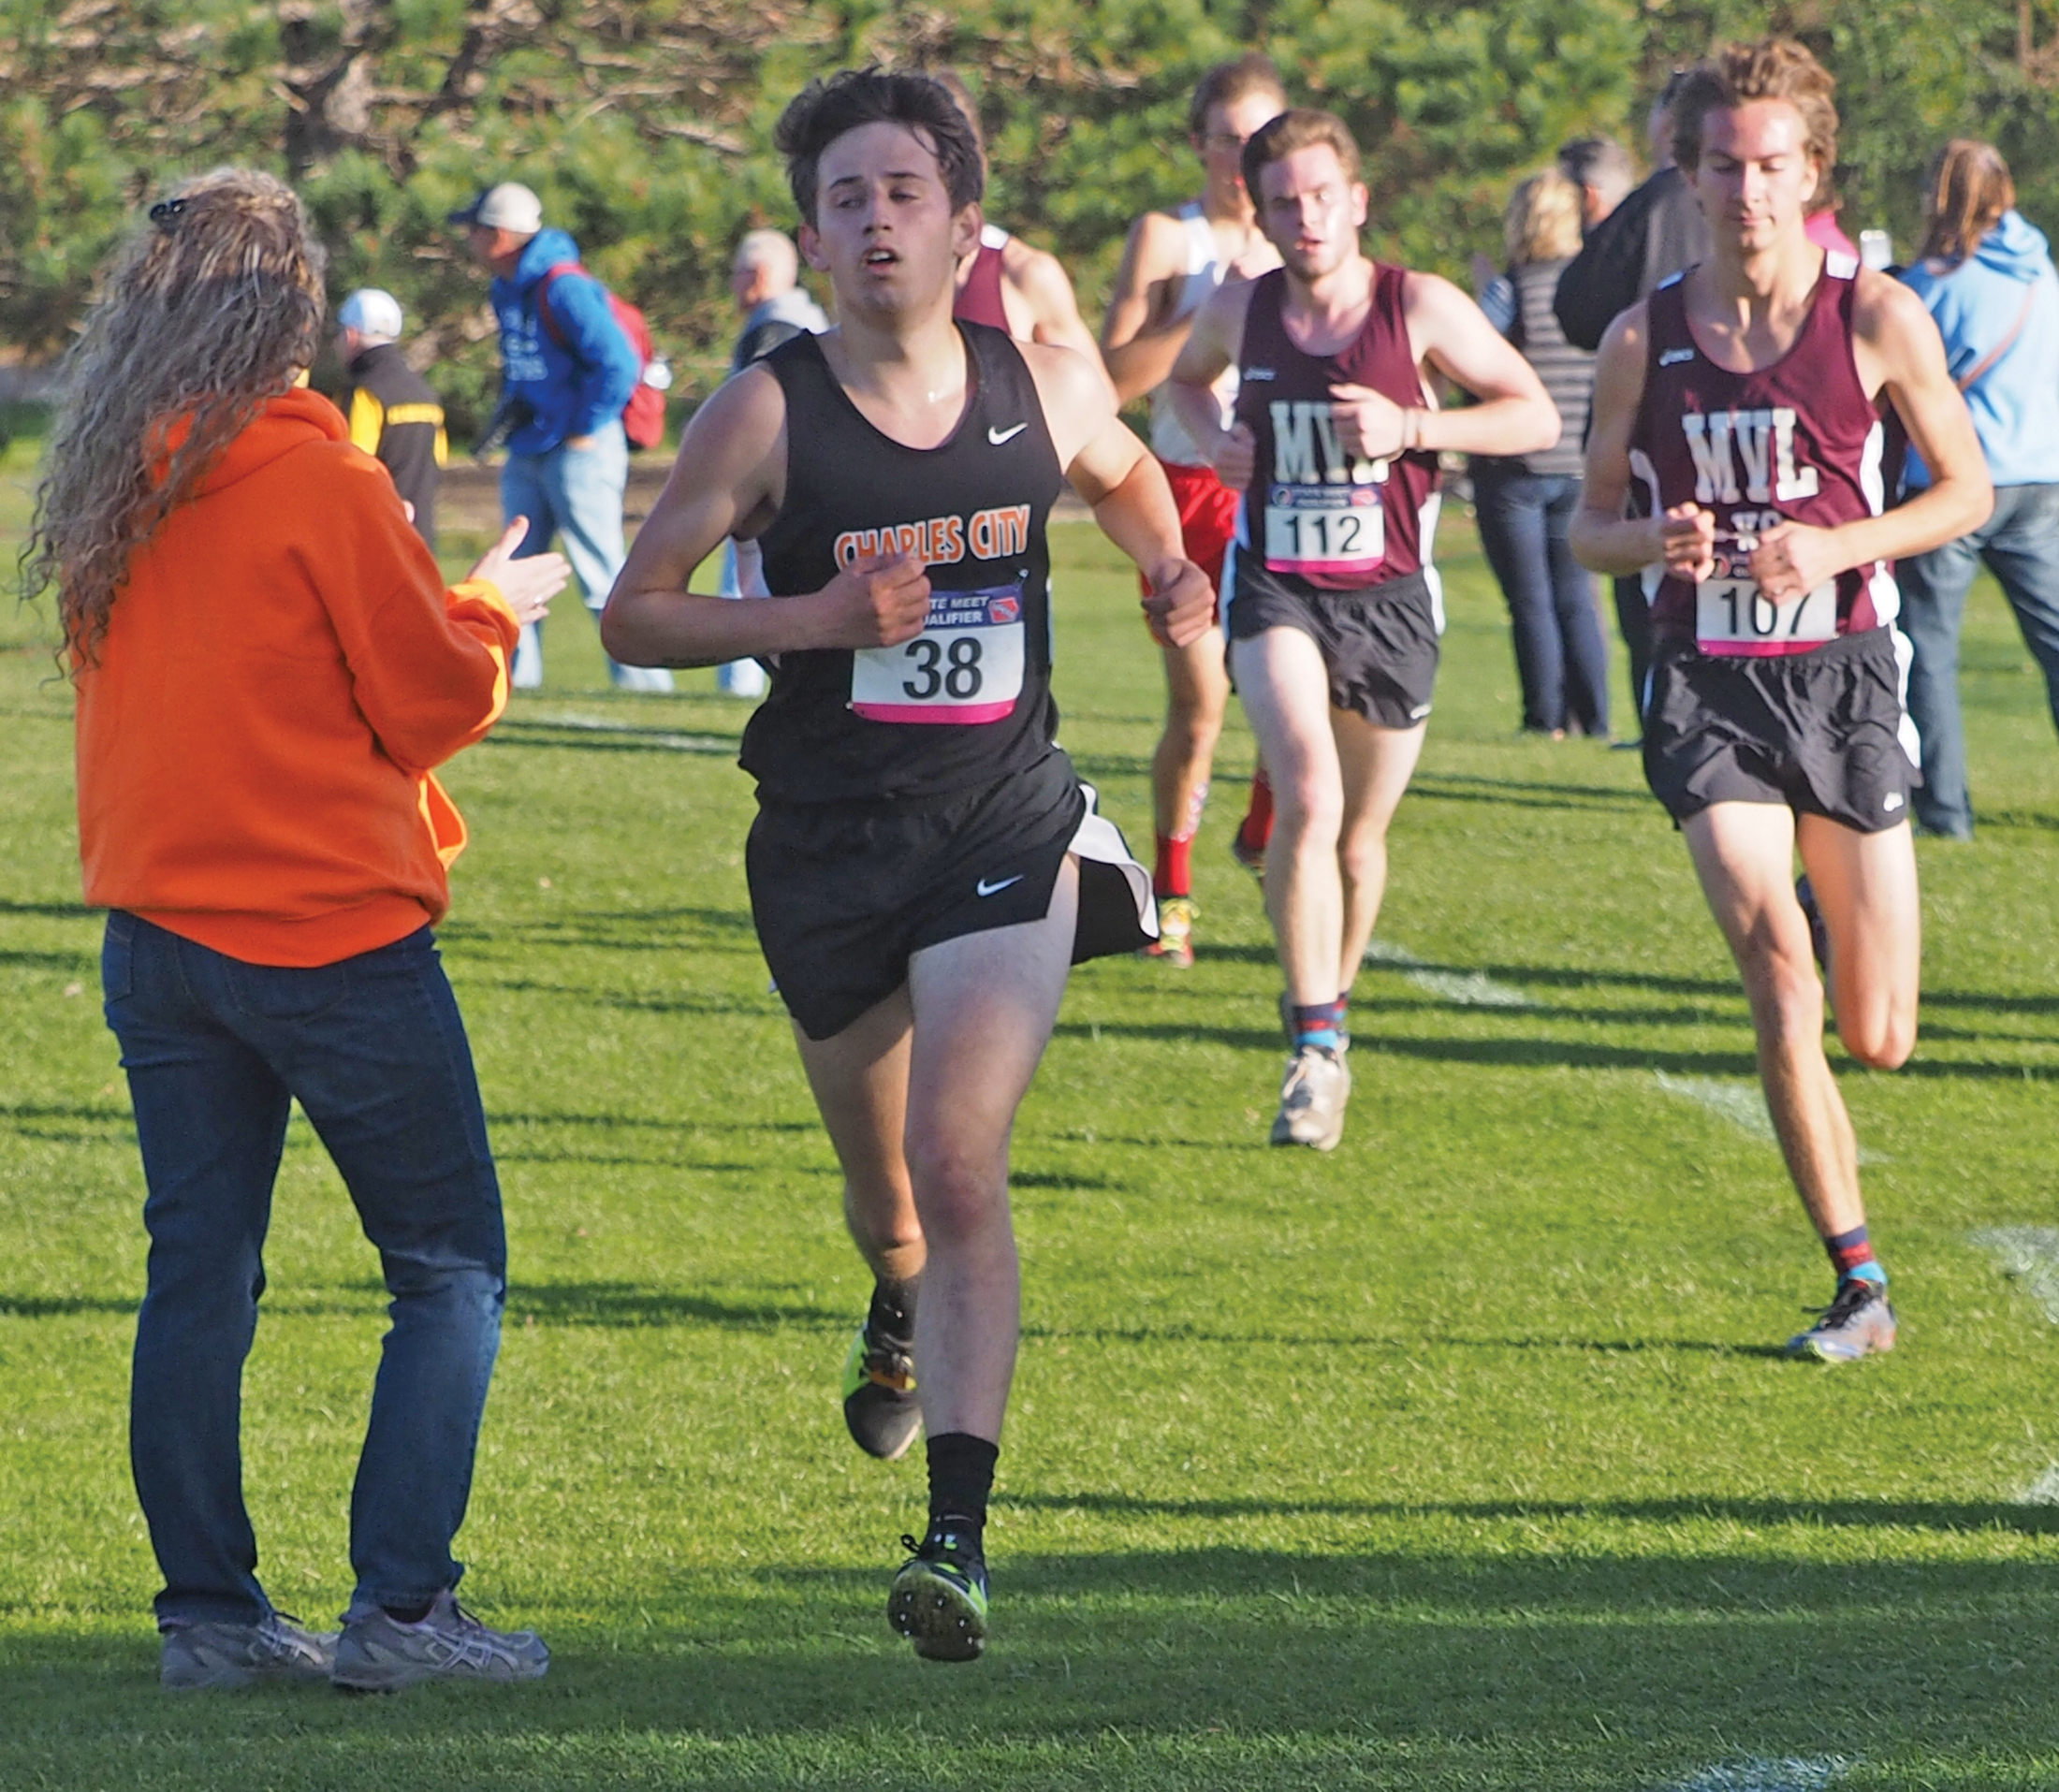 Shuttle service from parking lots offered at State XC Championships